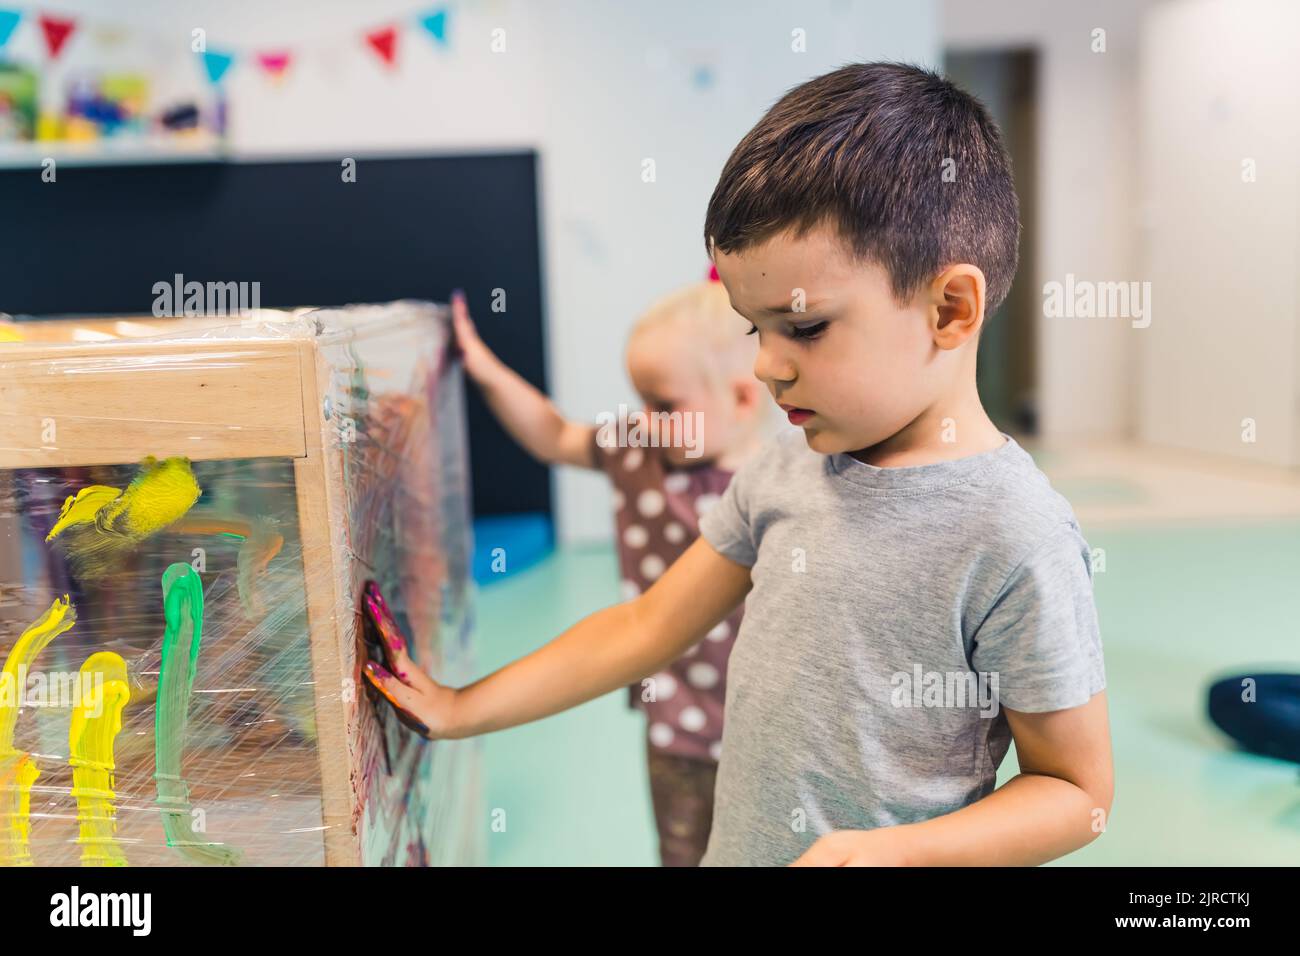 Cling wrap painting for improving kids imagination and brain development. Toddlers finger painting with tempera paints on a cling film wrapped around the wooden shelving stand. Fun activity for kids fine and gross motor skills at the nursery school. High quality photo Stock Photo